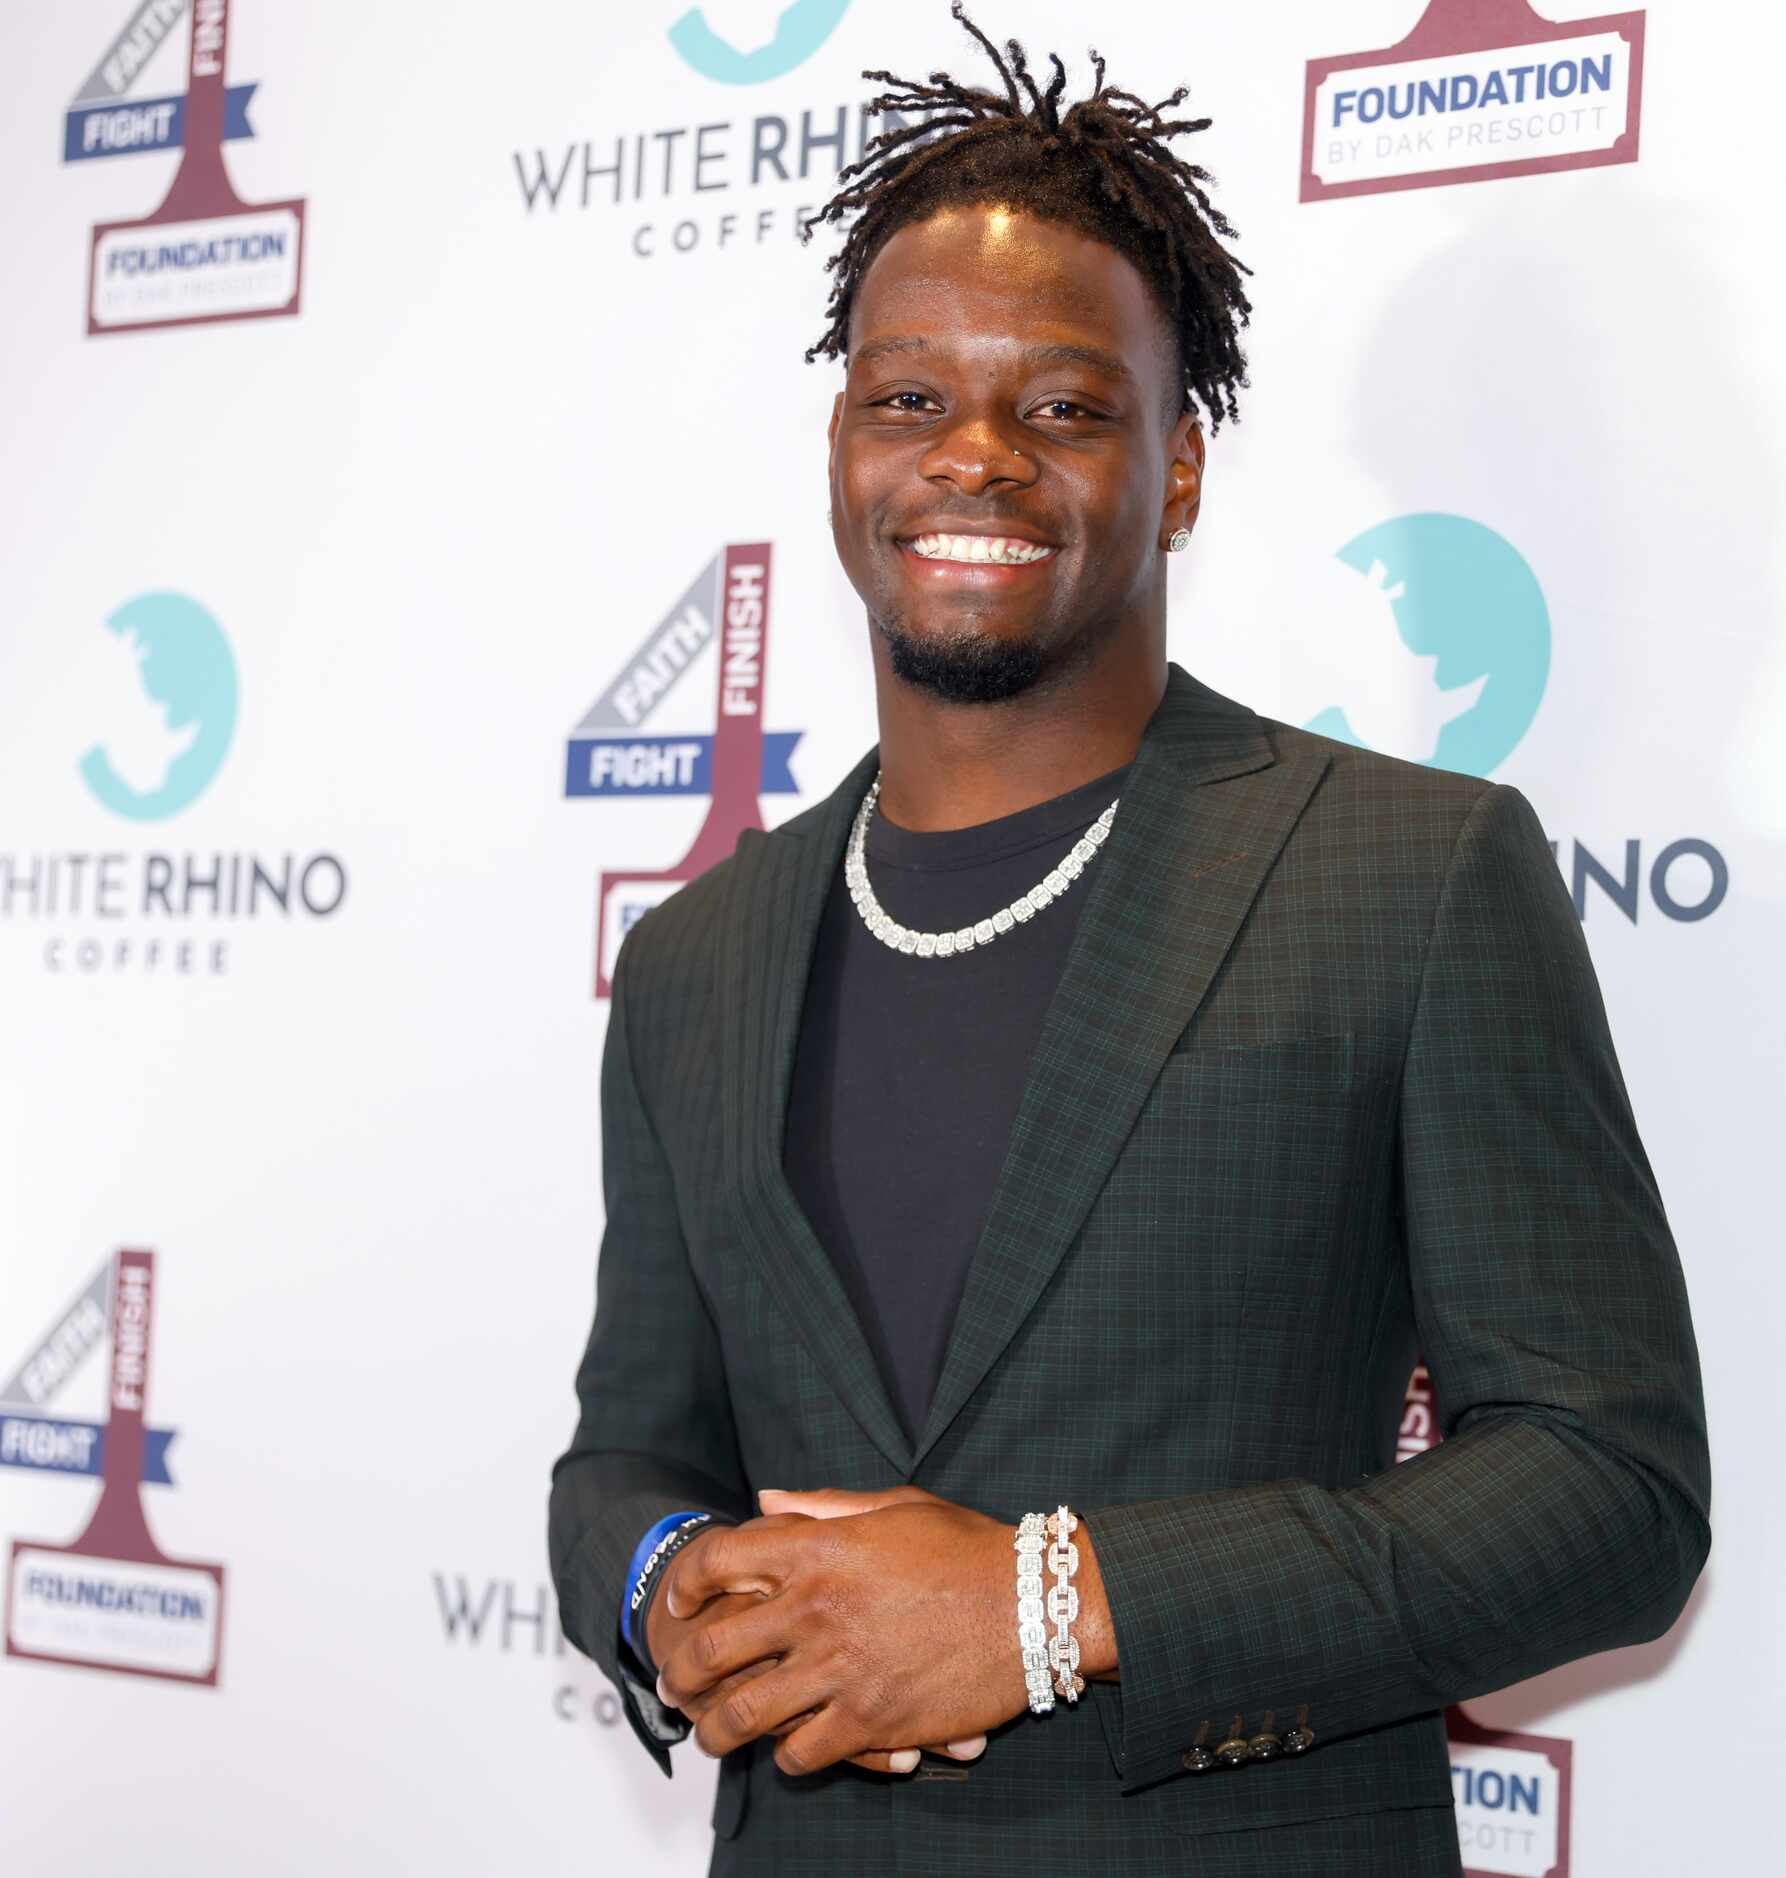 Dallas Cowboys wide receiver Michael Gallup poses for a portrait at the annual Faith Fight...